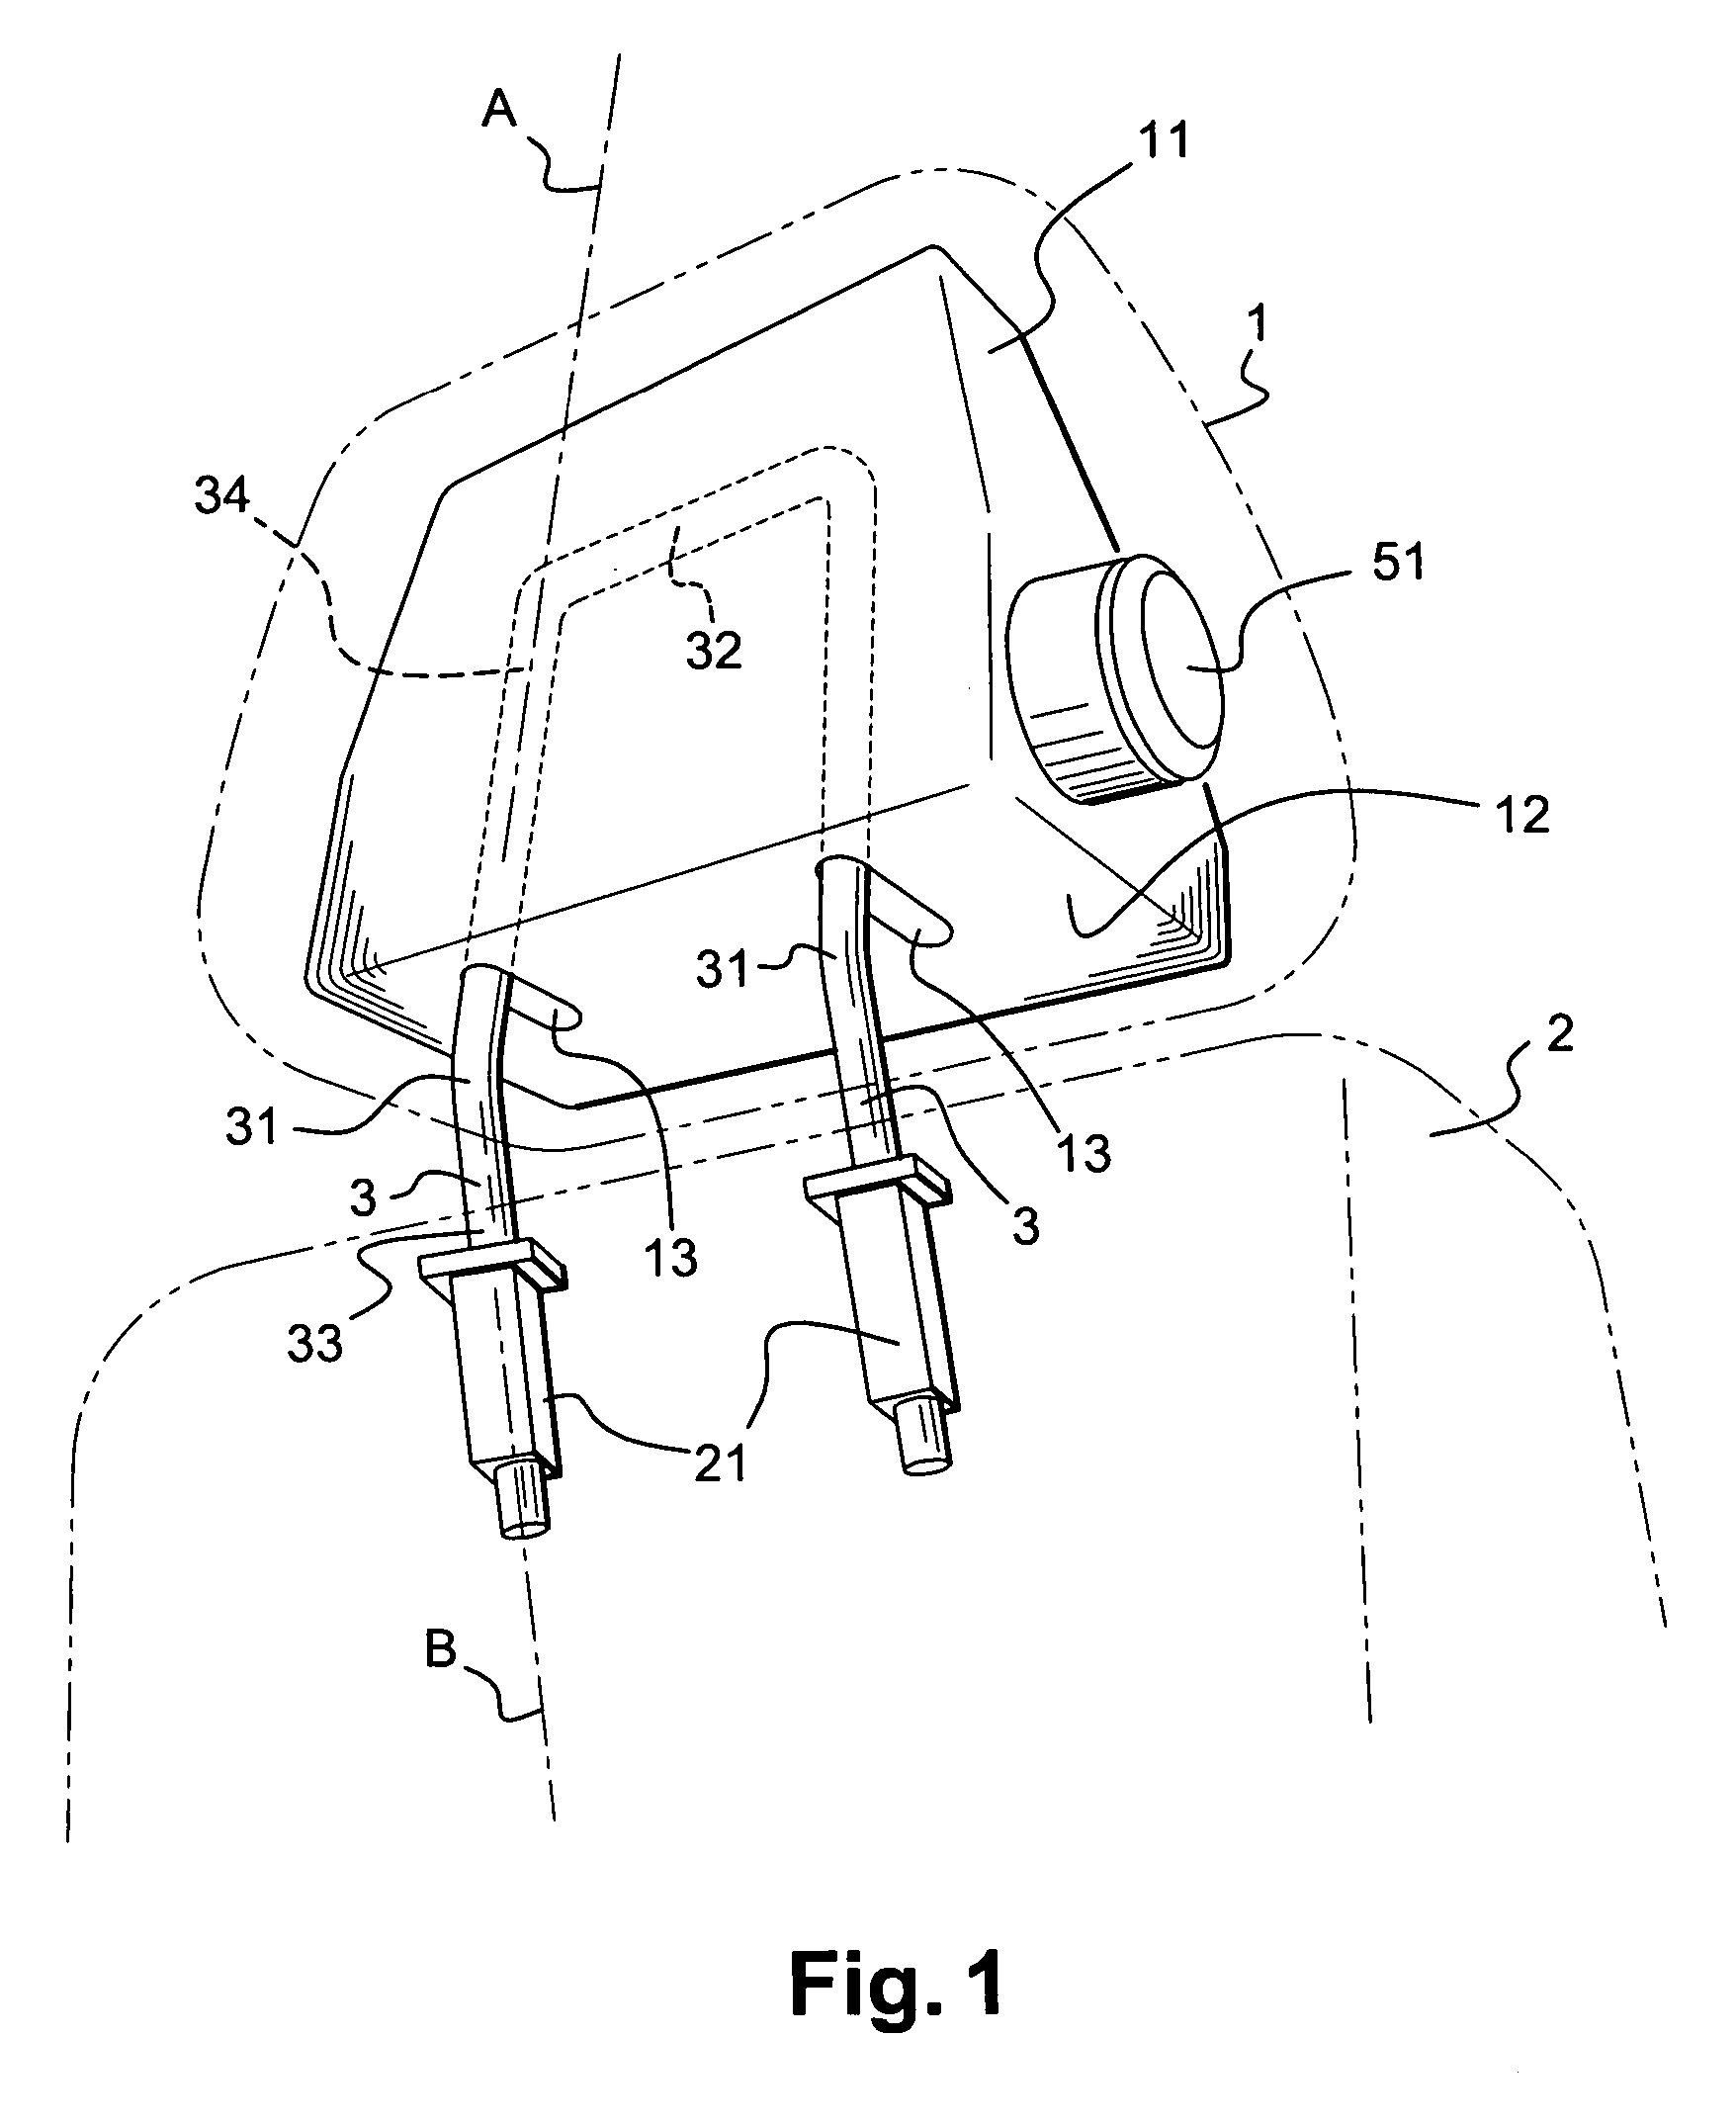 Translation movement guidance mechanism with positional locking, for adjustable elements of an automobile vehicle seat